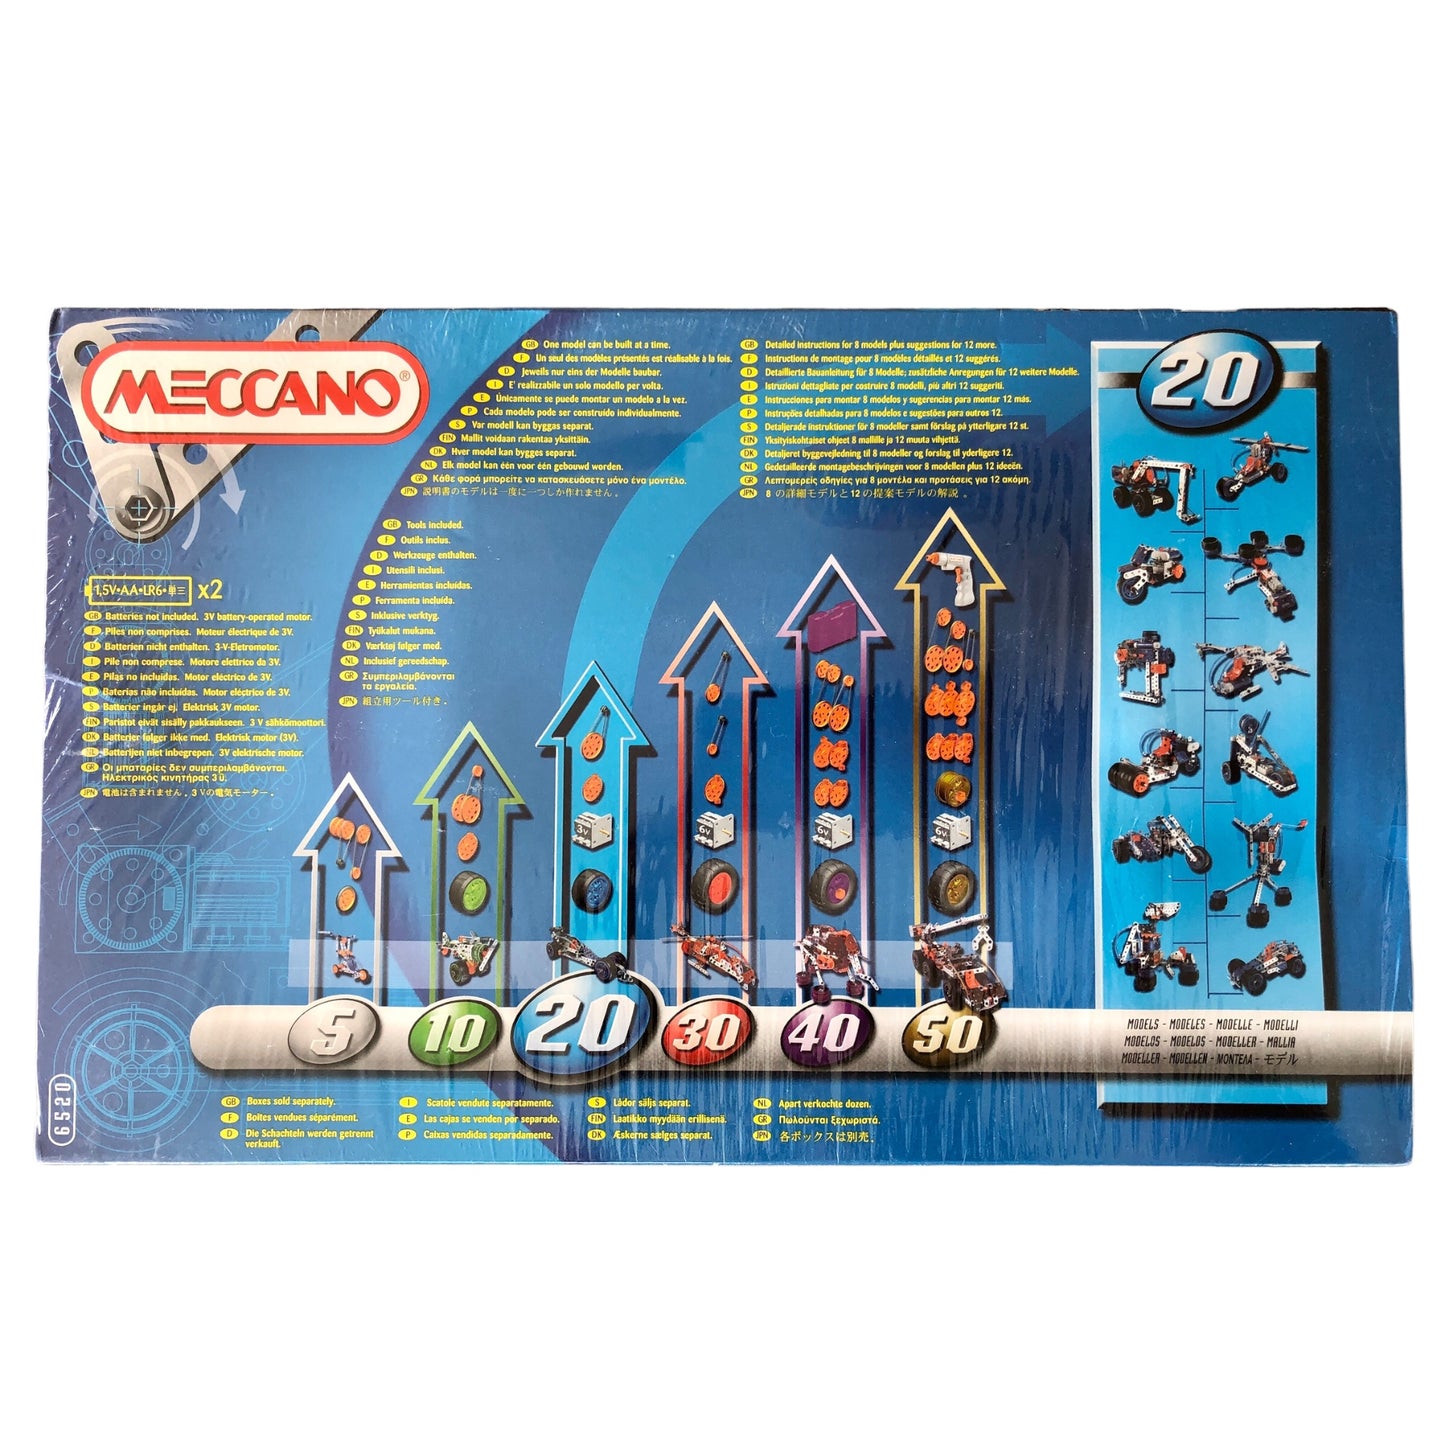 Meccano Motion System 5510 - 261 Teile - 20 Modelle